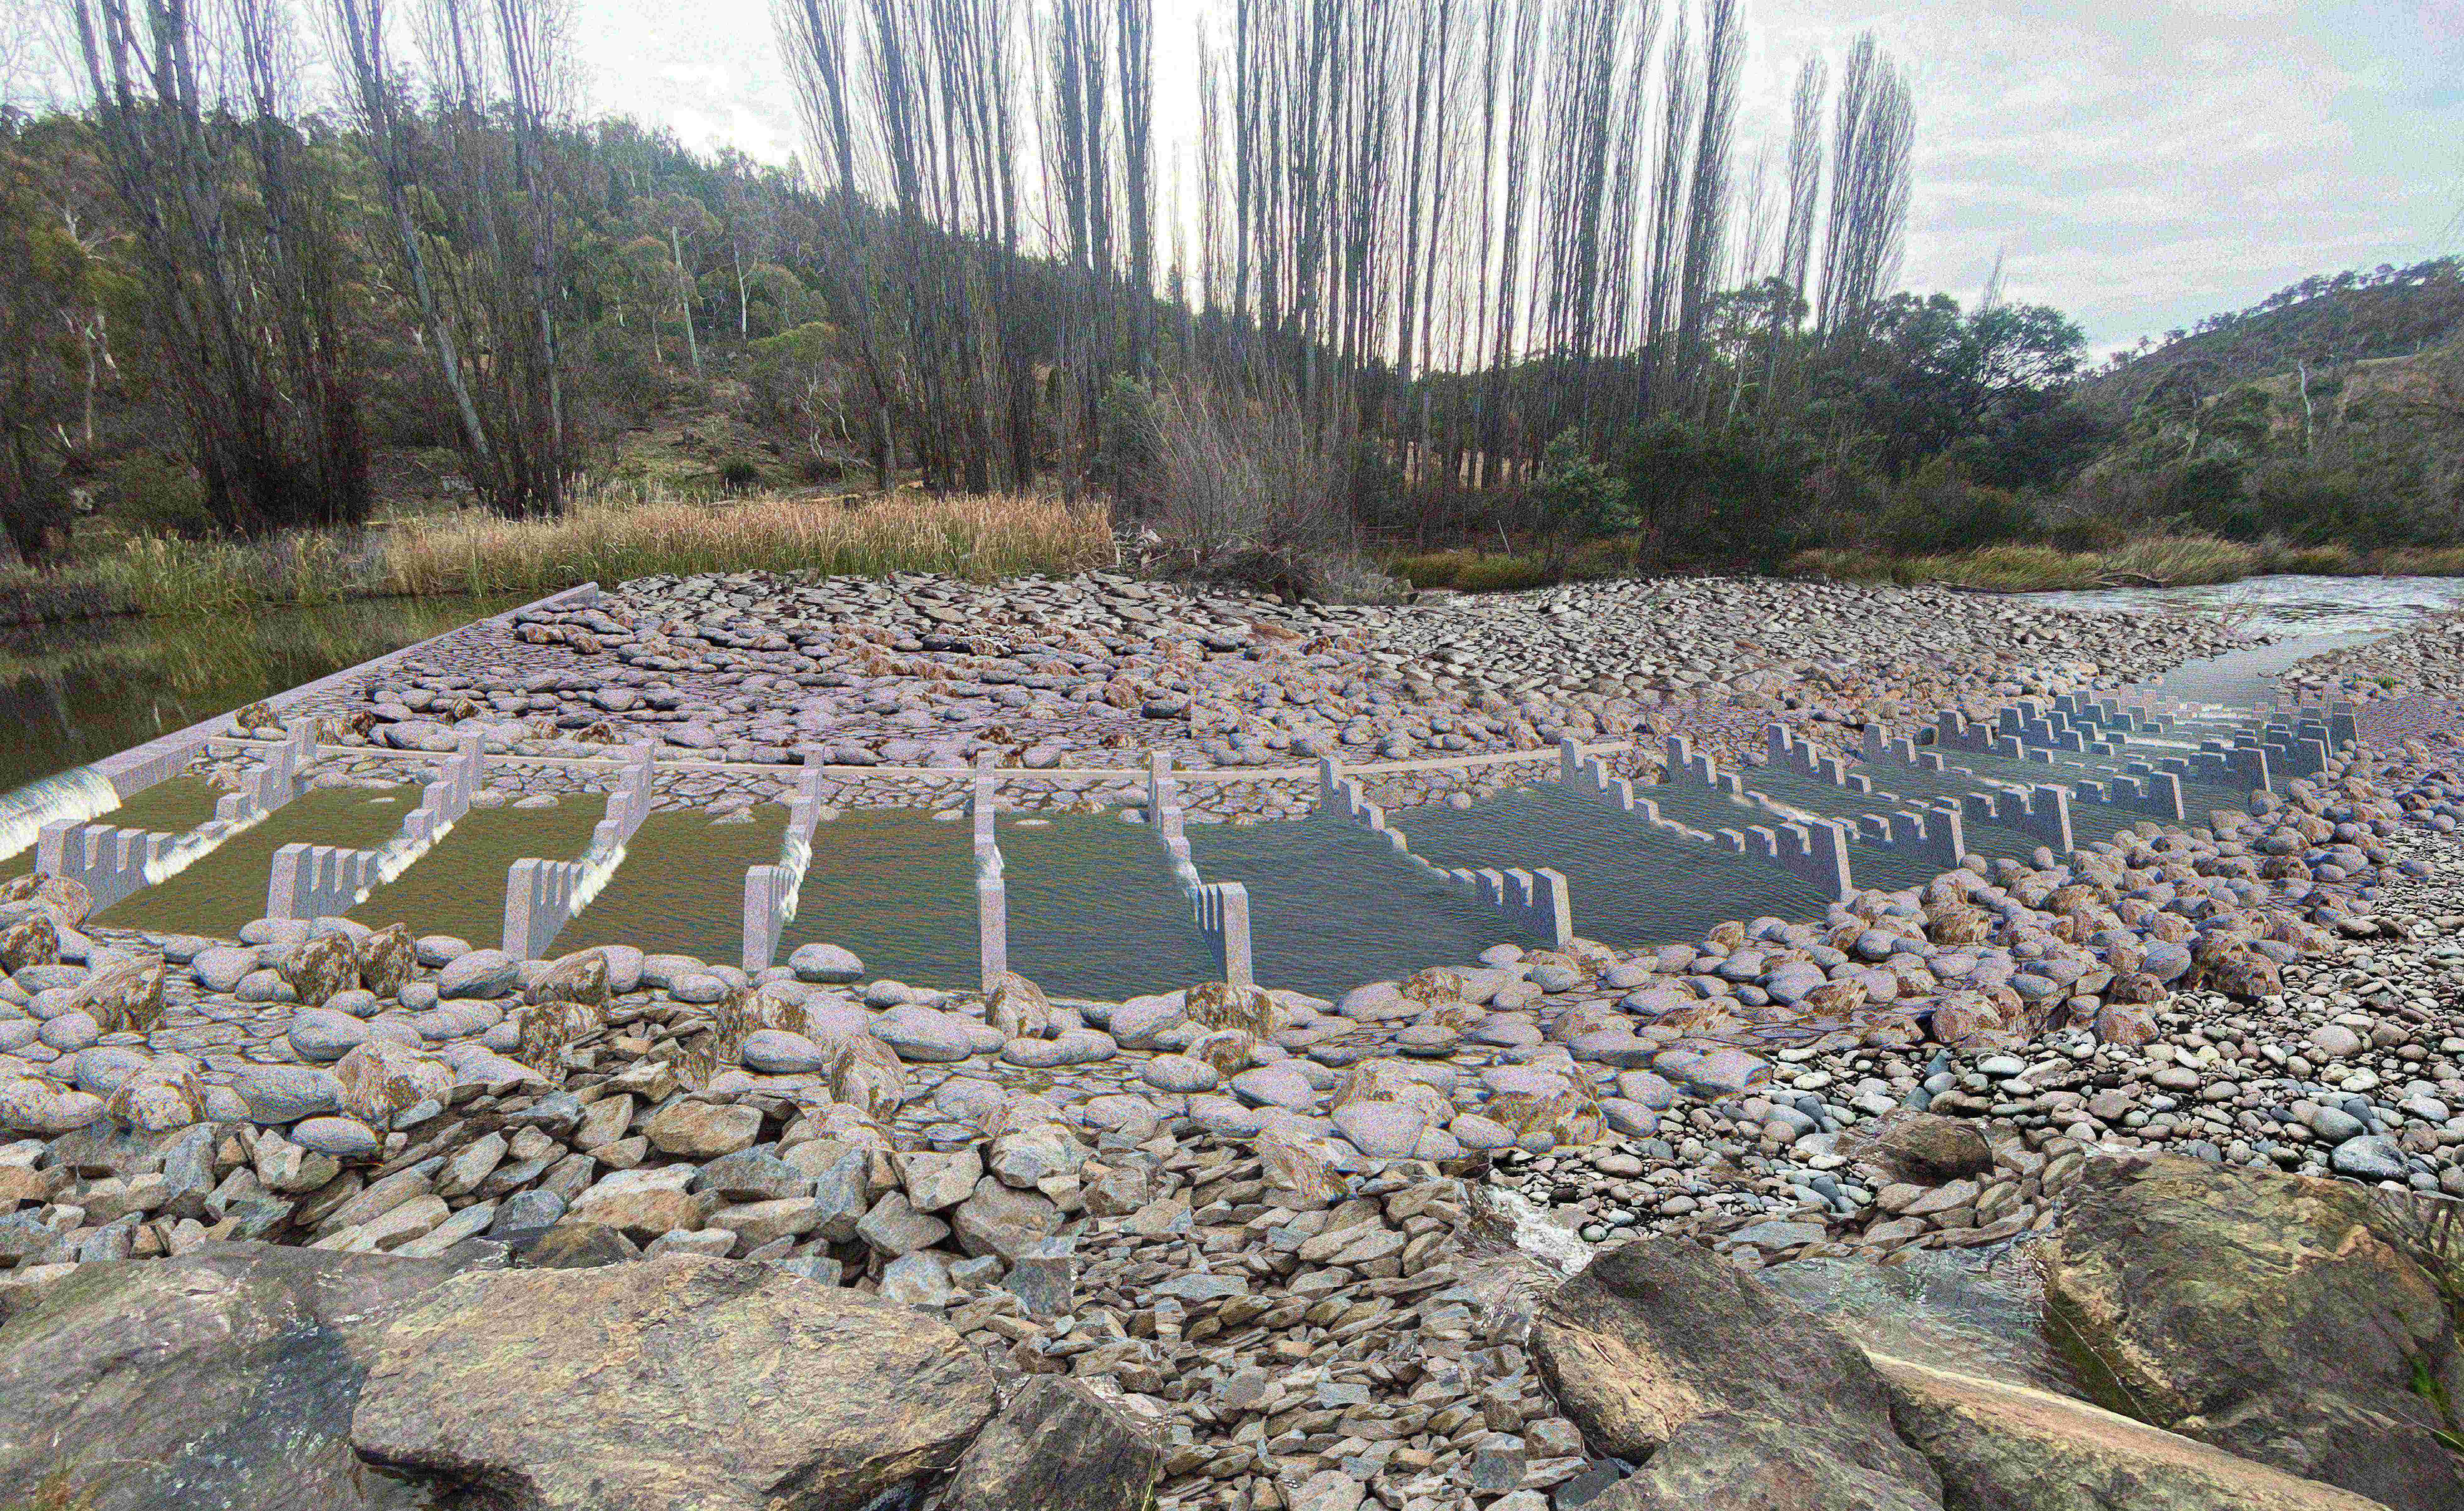 Rain delays replacement of Cooma's ageing weir and fishway